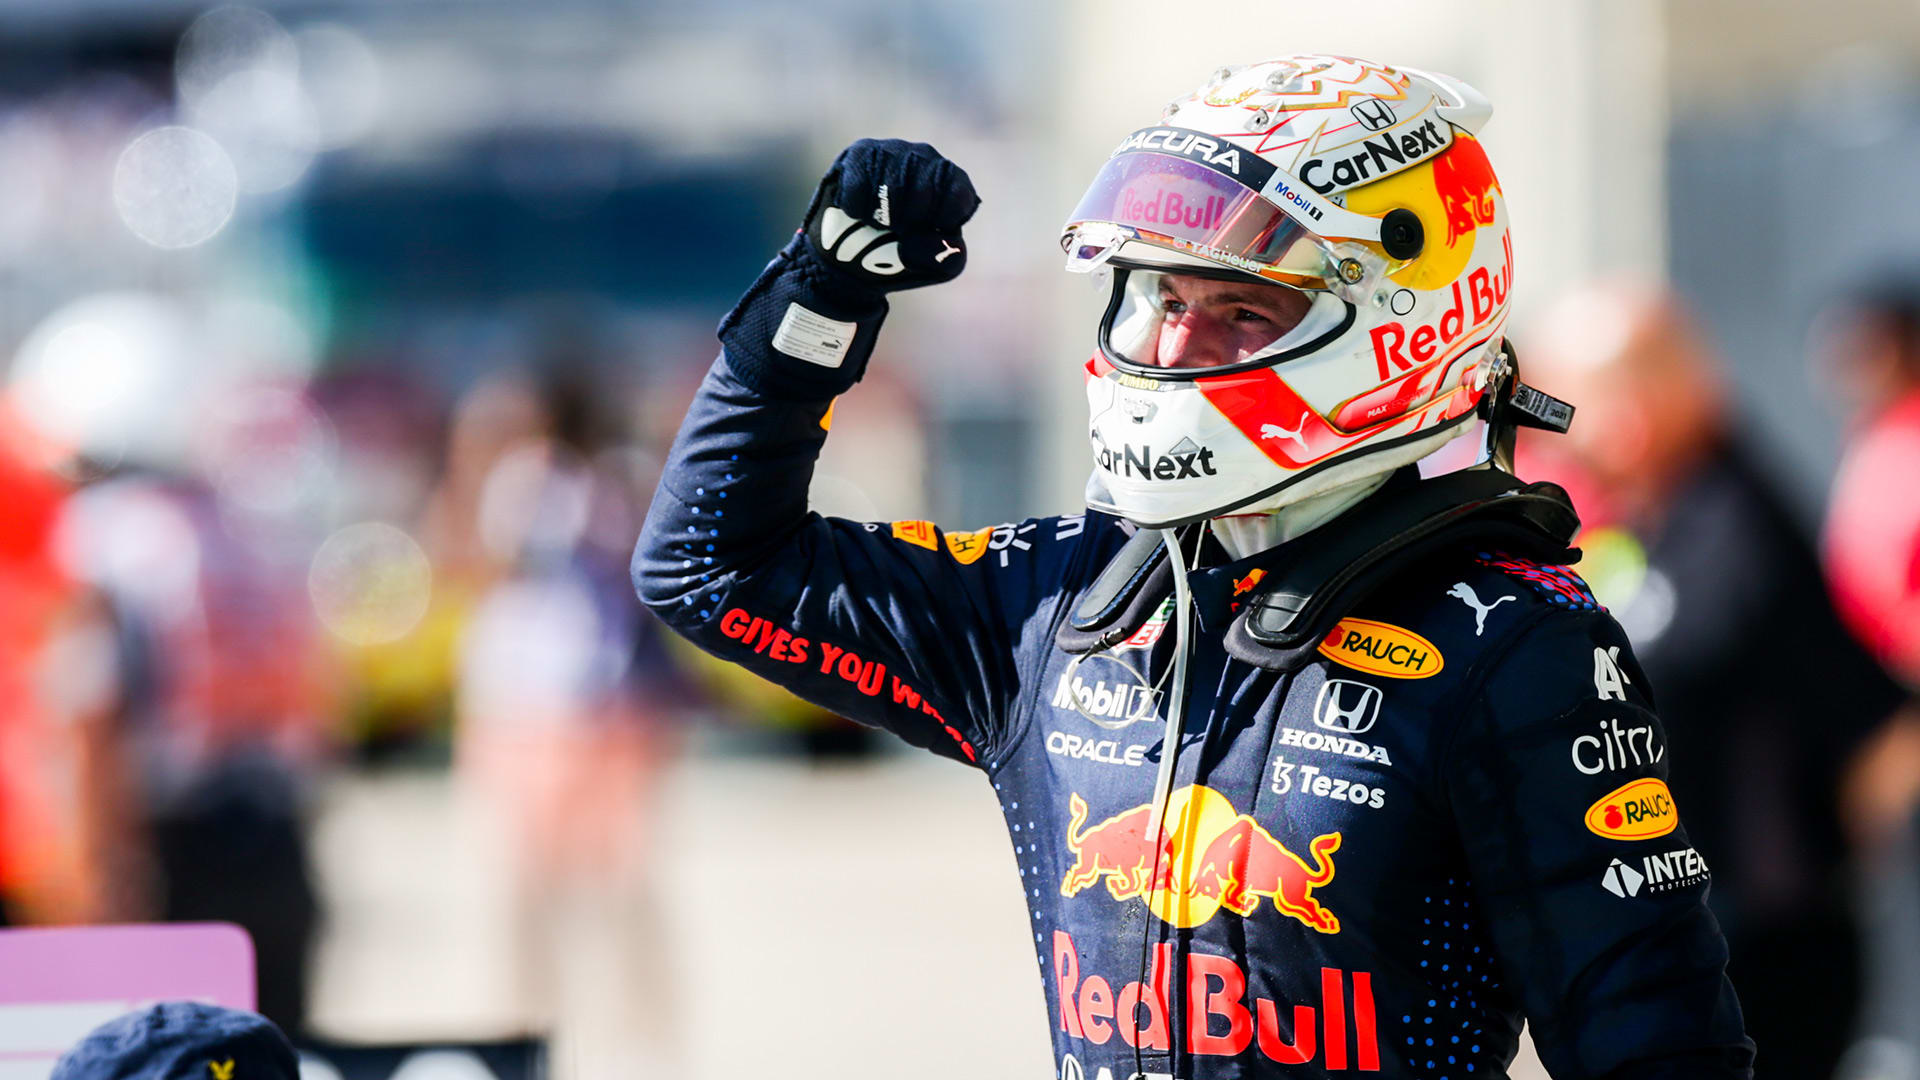 21 United States Grand Prix Report And Highlights Verstappen Brilliantly Holds Off Hamilton To Seal Victory In Austin And Extend Championship Lead Formula 1